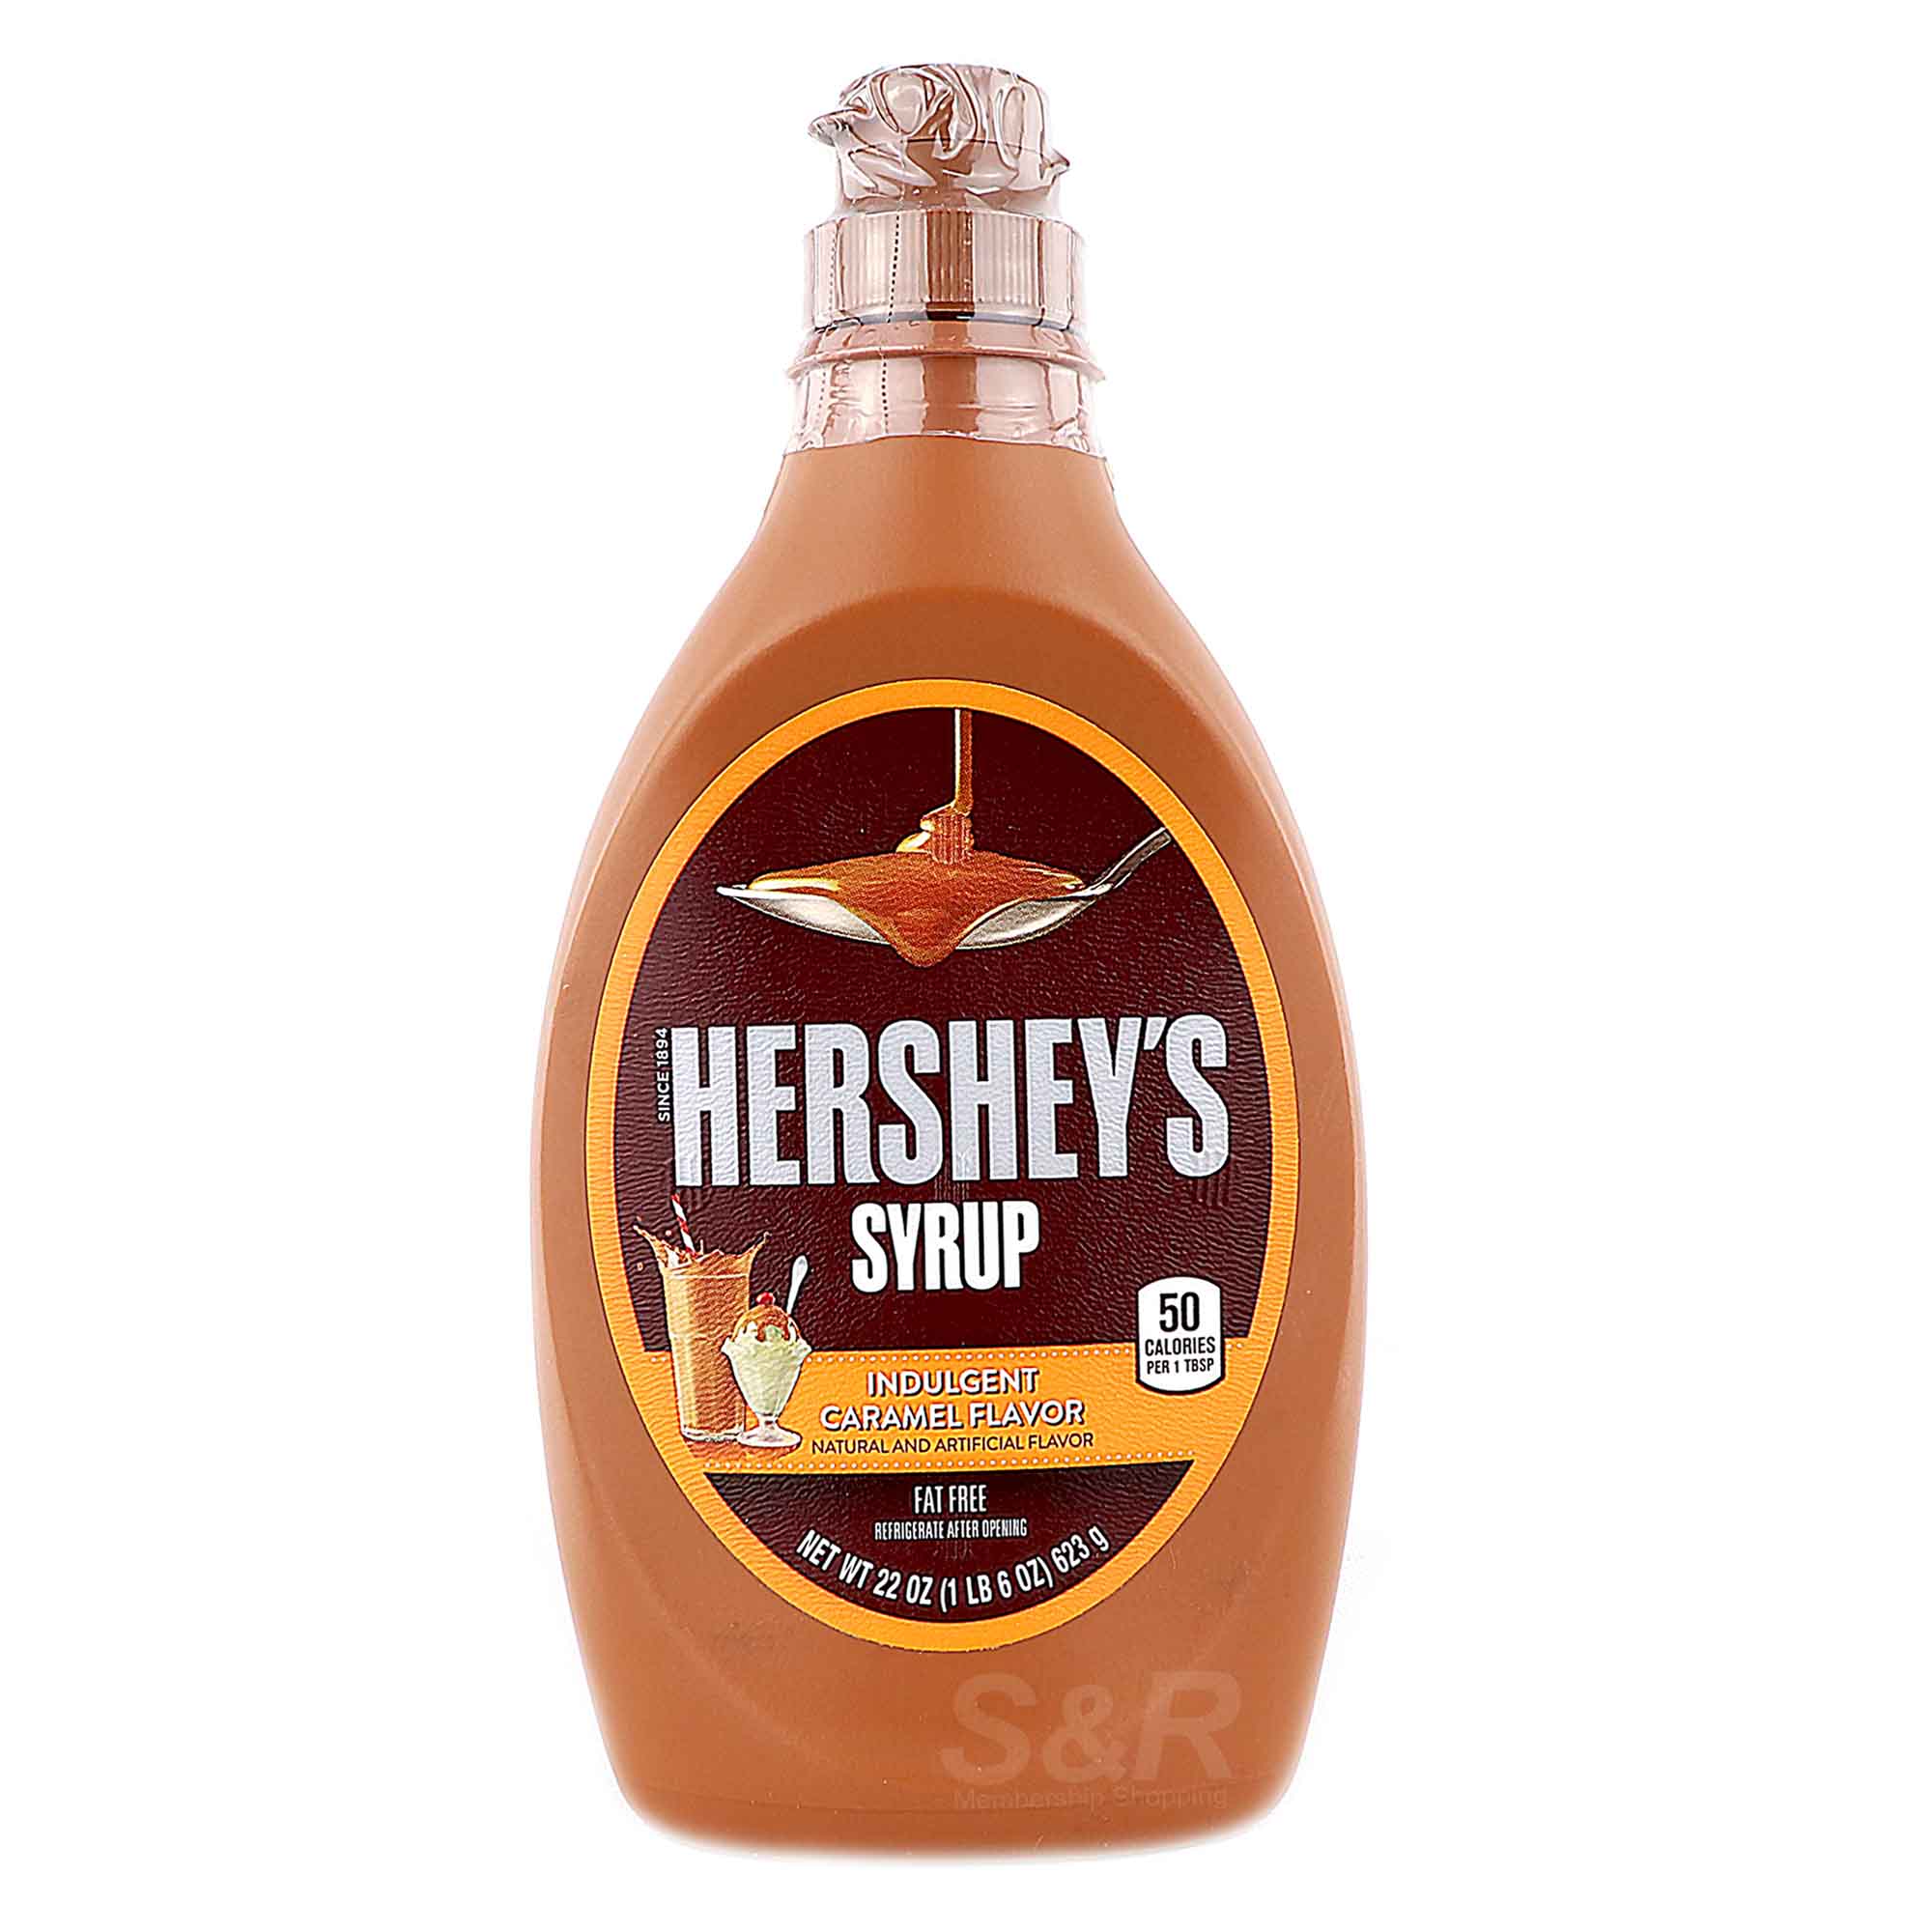 Hershey's Syrup Delicious Caramel Flavor 623g